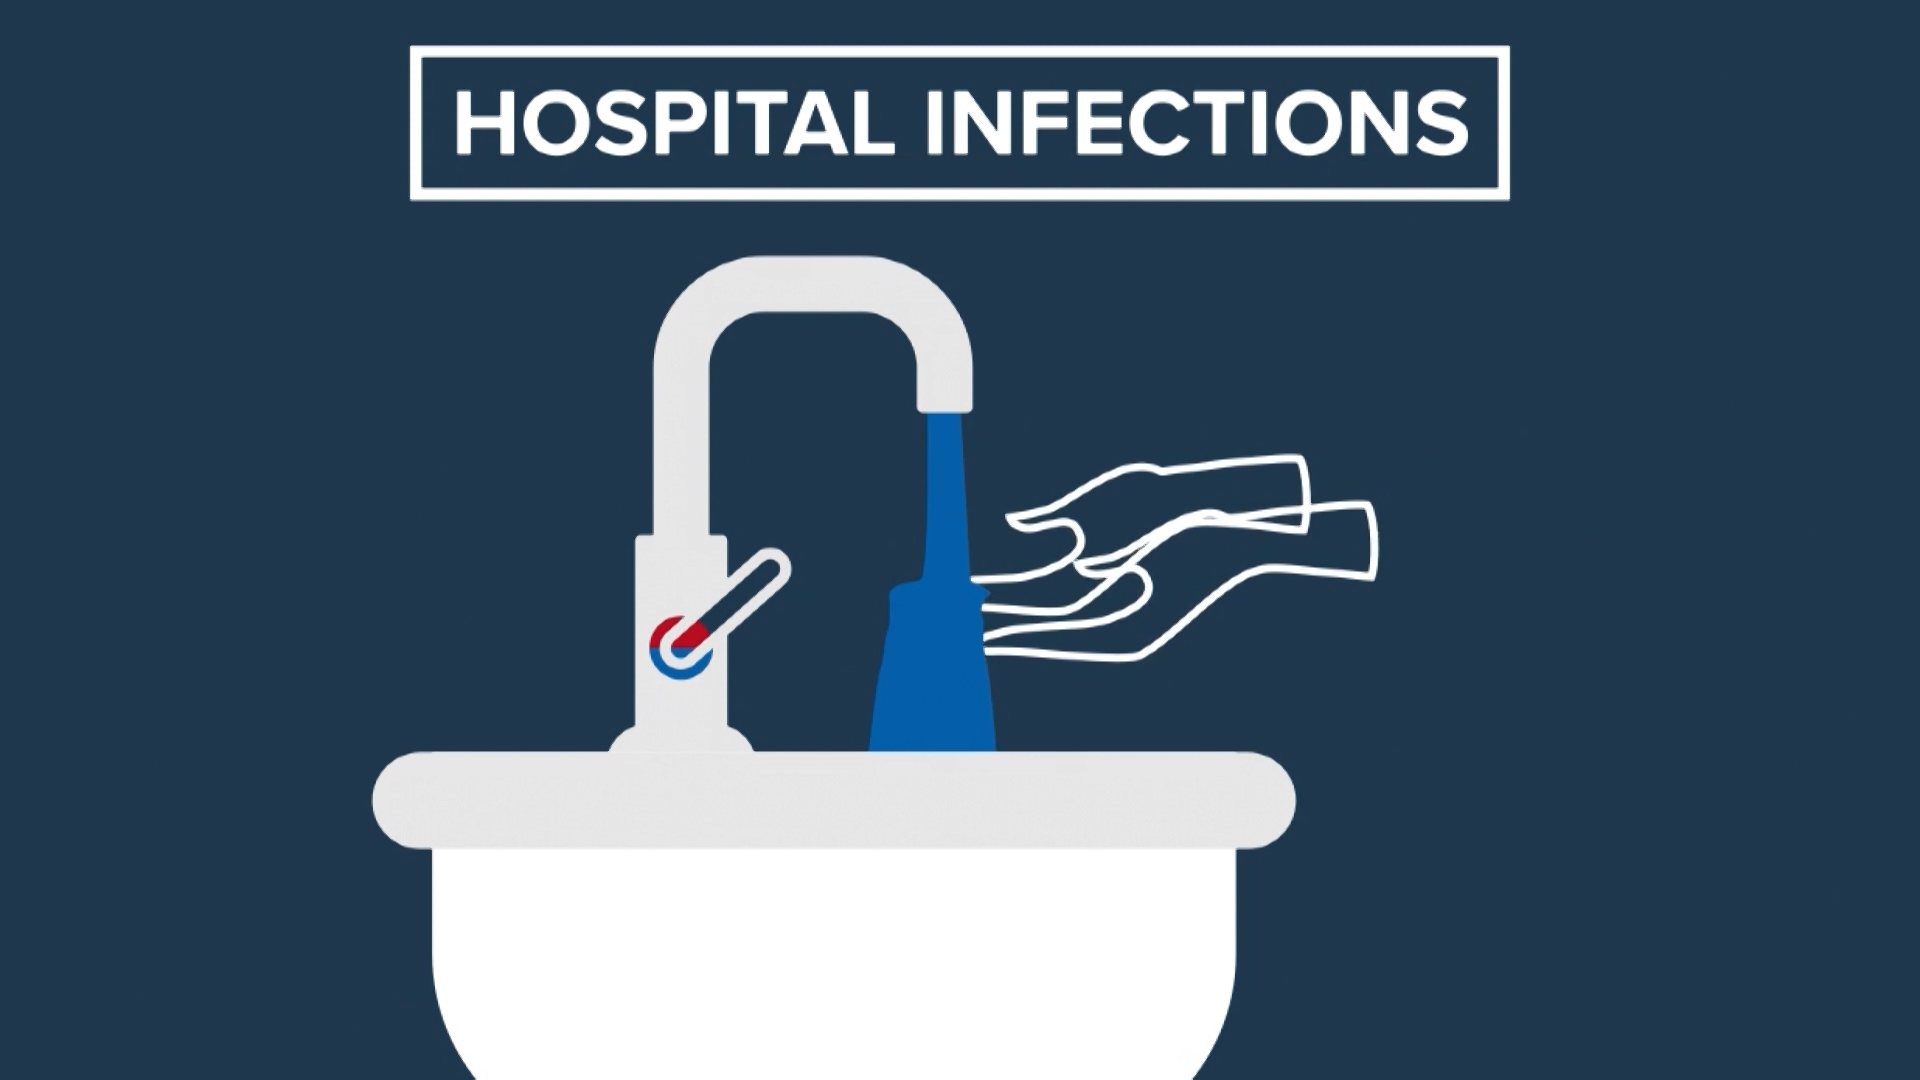 Lawsuits, state health reports and published research document infections in hospitals across the country -- five in the Carolinas alone since 2013.